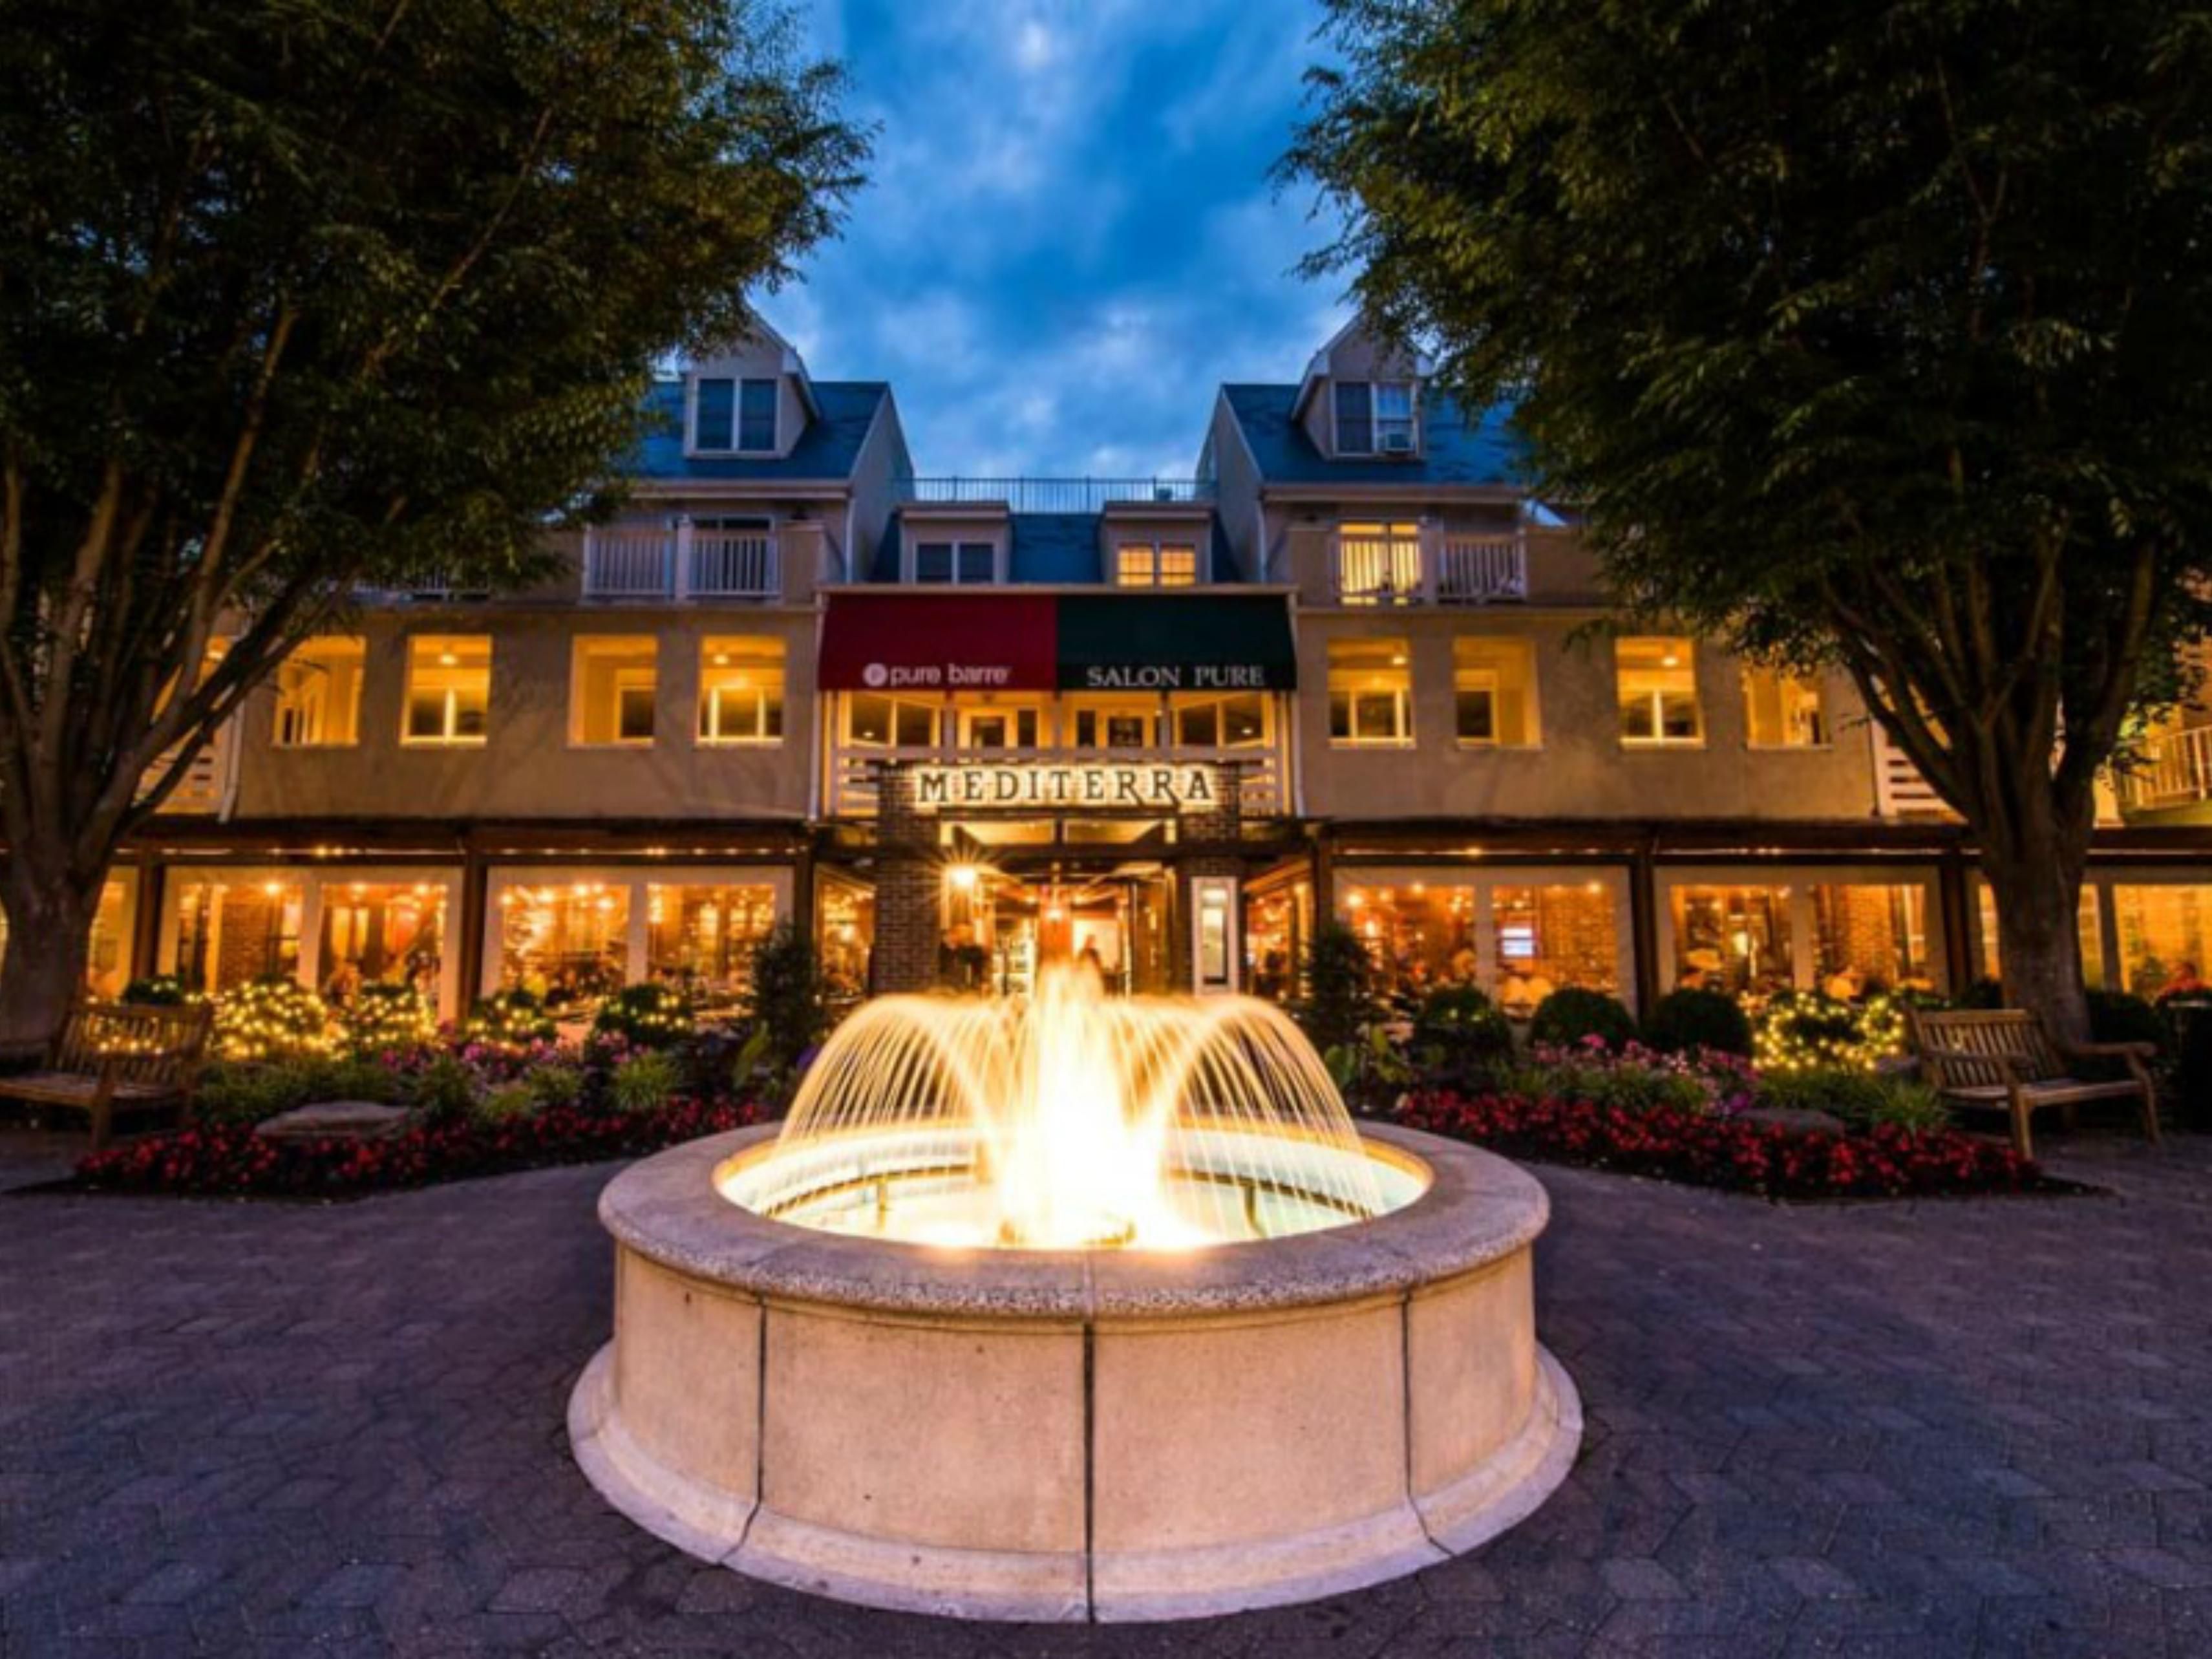 Experience boutique shops, local eatery's and historic Princeton University located within 4 miles of the hotel. Explore Grounds for Sculpture, McCarter Theatre Center and Palmer Square. Enjoy all the area has to offer!